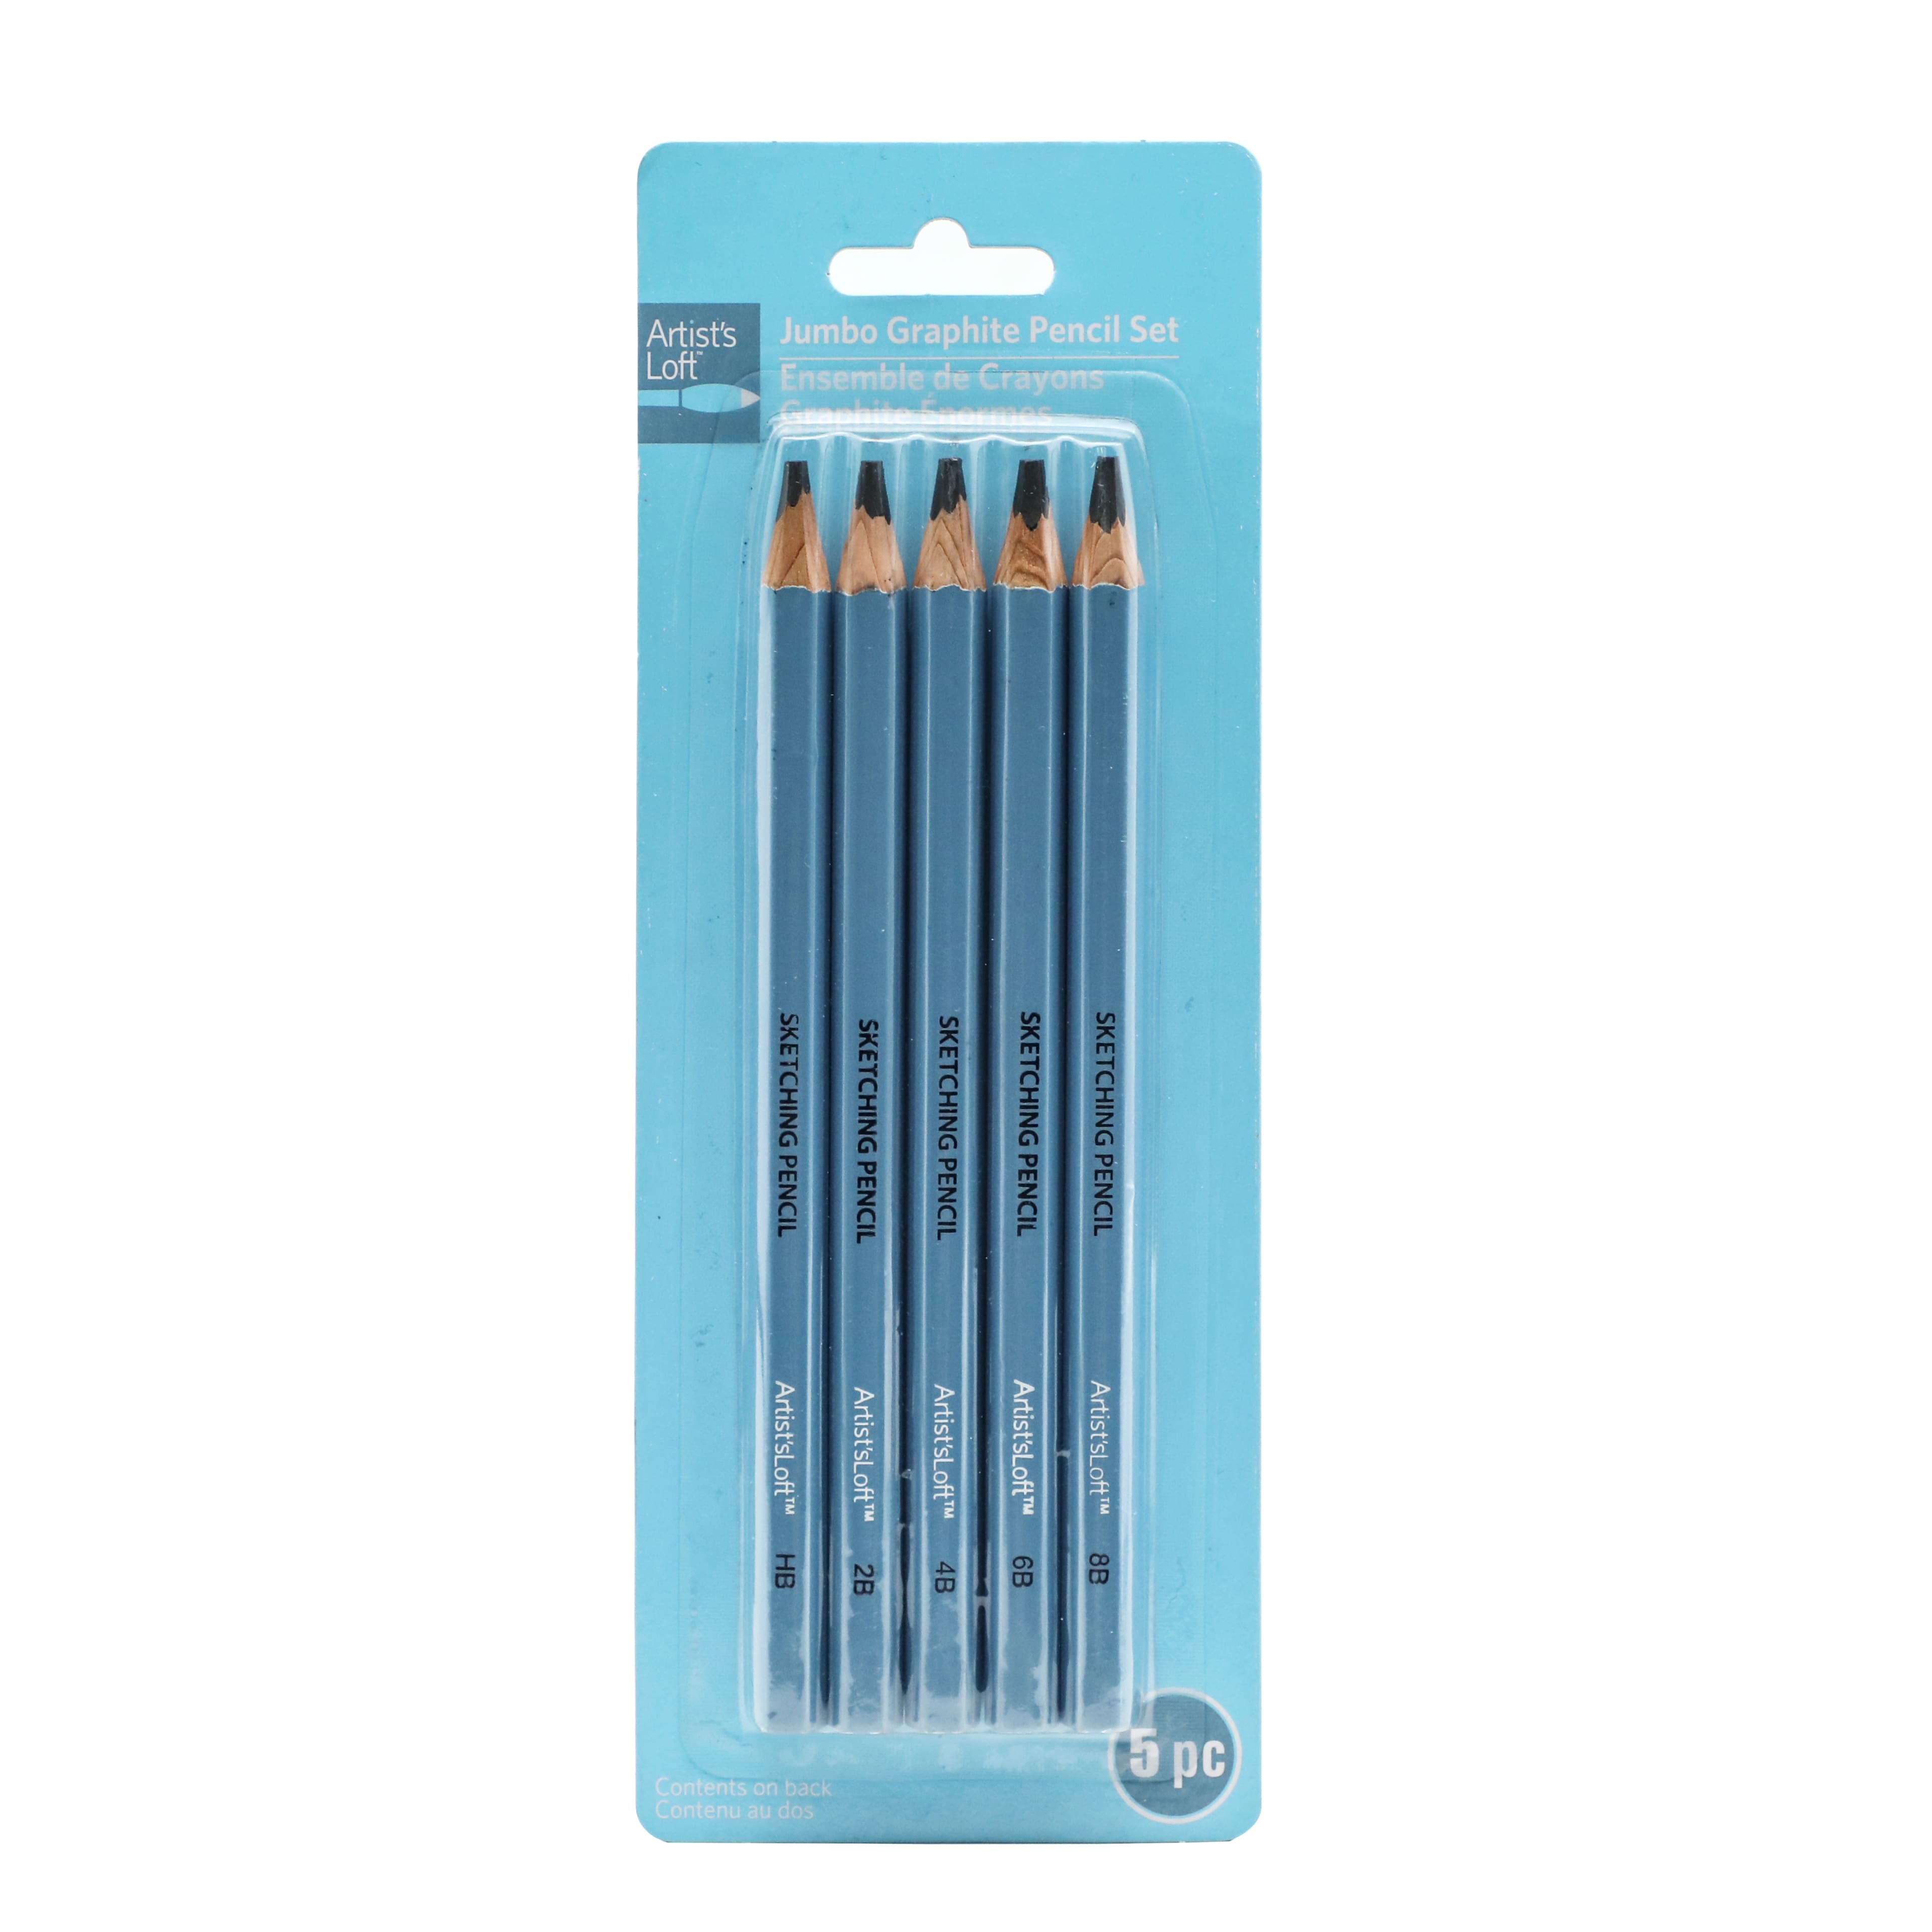 Dry Erase Markers By ArtMinds®